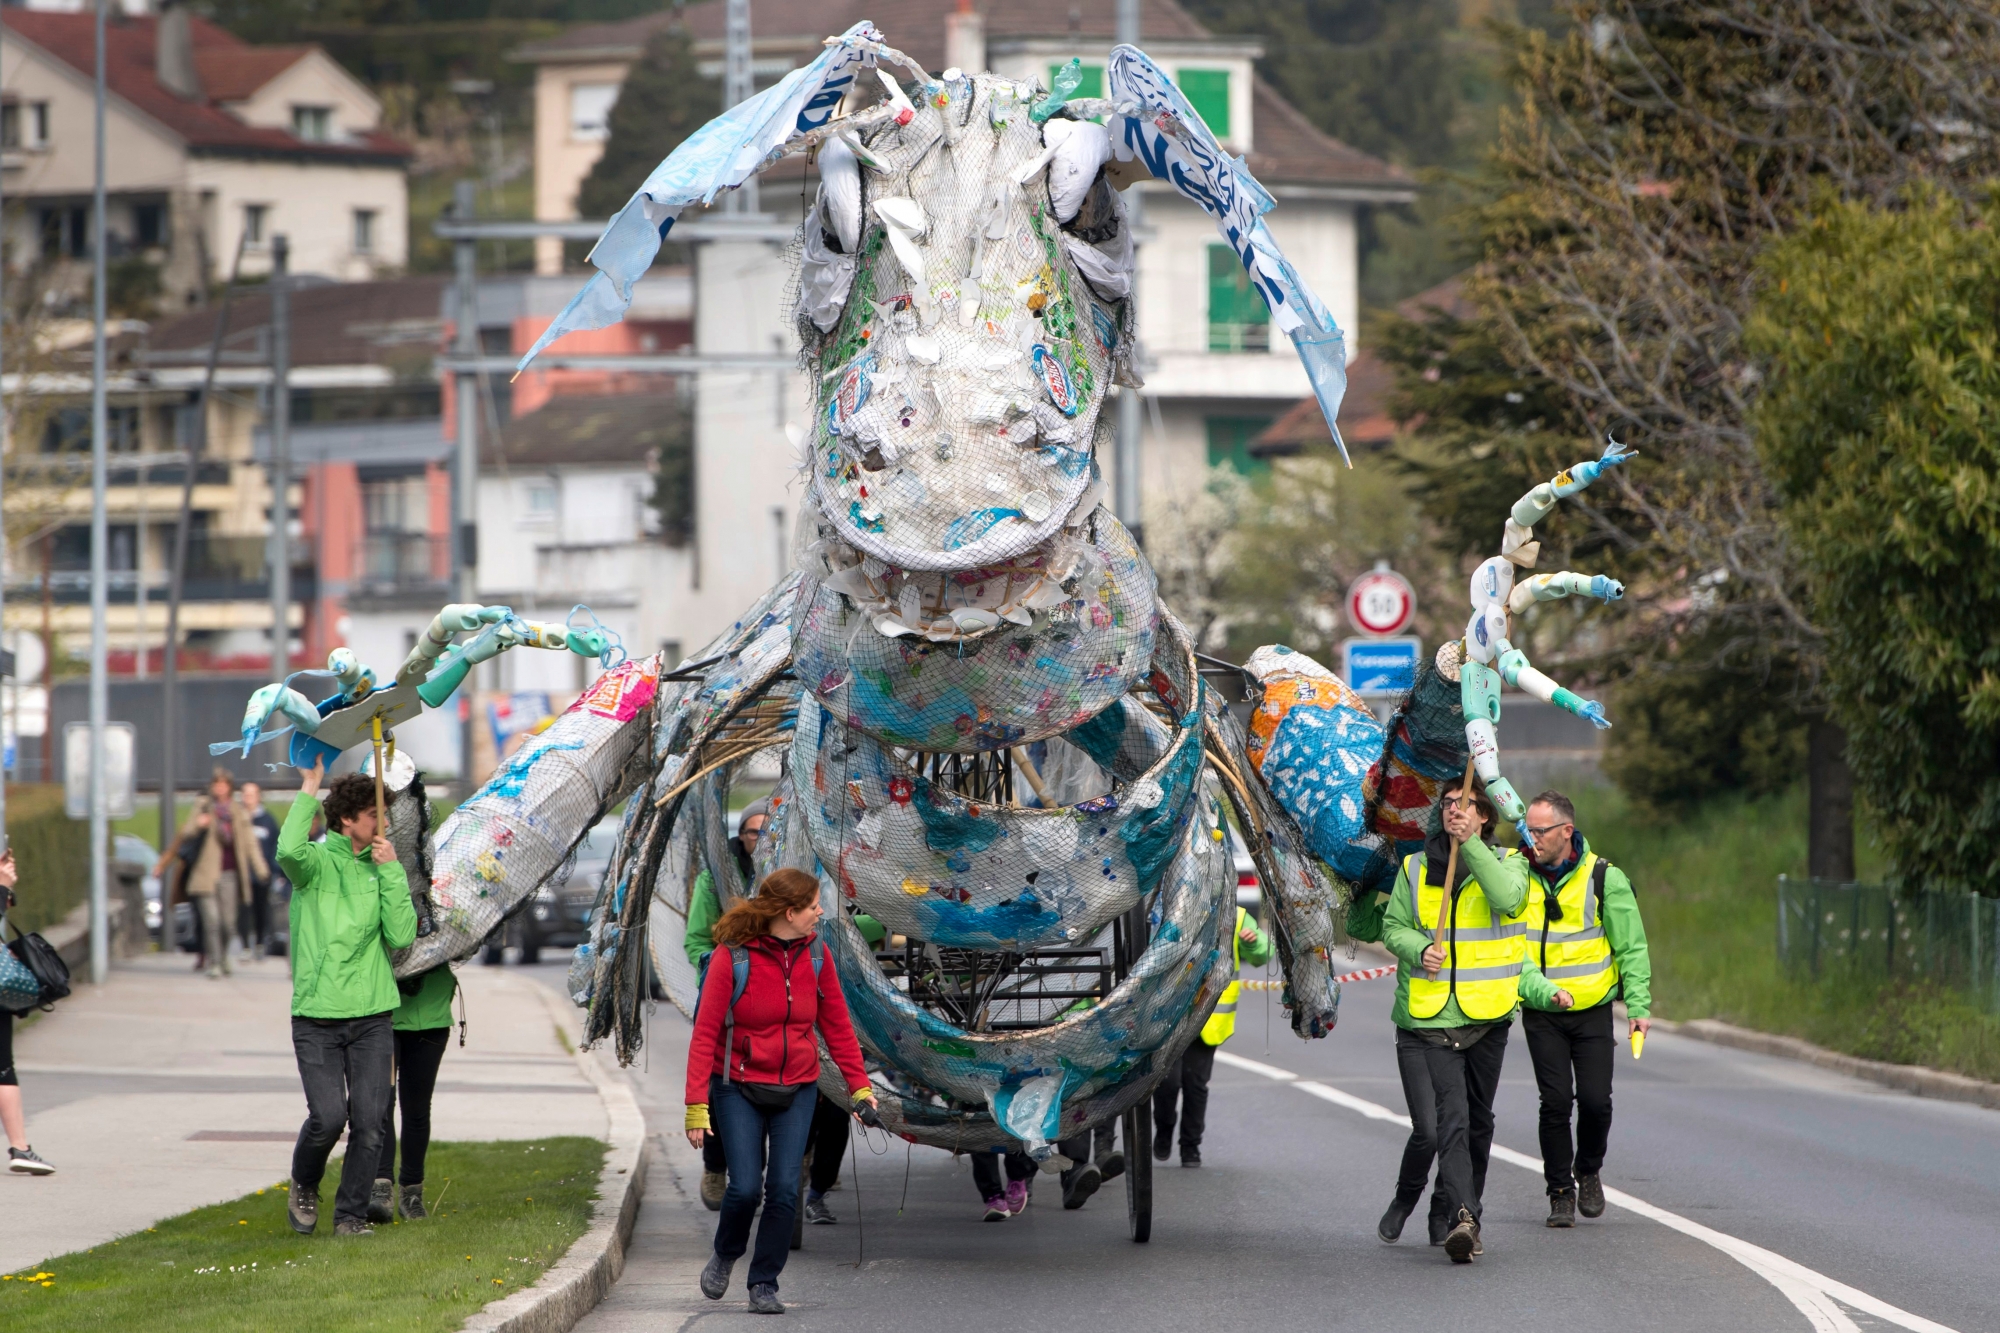 Greenpeace activists bring back to food and drinks giant Nestle a huge monster made of plastic recovered at sea and on the beaches by Greenpeace in front of the Nestle's headquarter in Vevey, Switzerland, Tuesday, April 16, 2019. The NGO wants above all to denounce the pollution caused by single-use plastics that end up creating real continents of waste in the oceans. (KEYSTONE/Laurent Gillieron) SWITZERLAND GREENPEACE NESTLE PLASTIC MONSTER